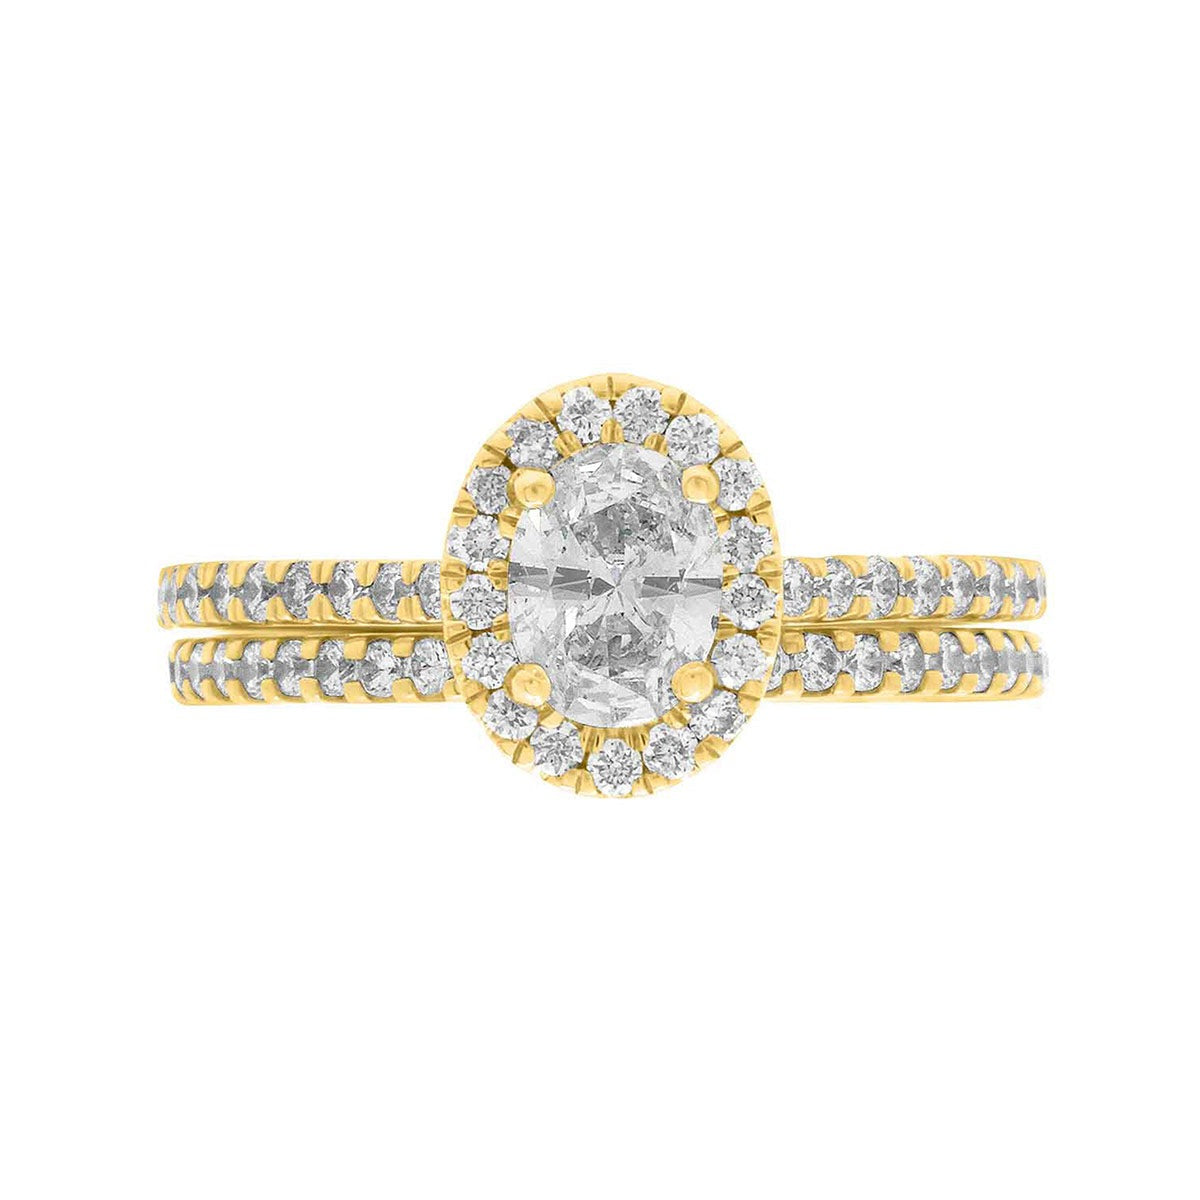 Oval Halo Engagement Ring made of yellow gold pictured with a a matching diamond wedding ring